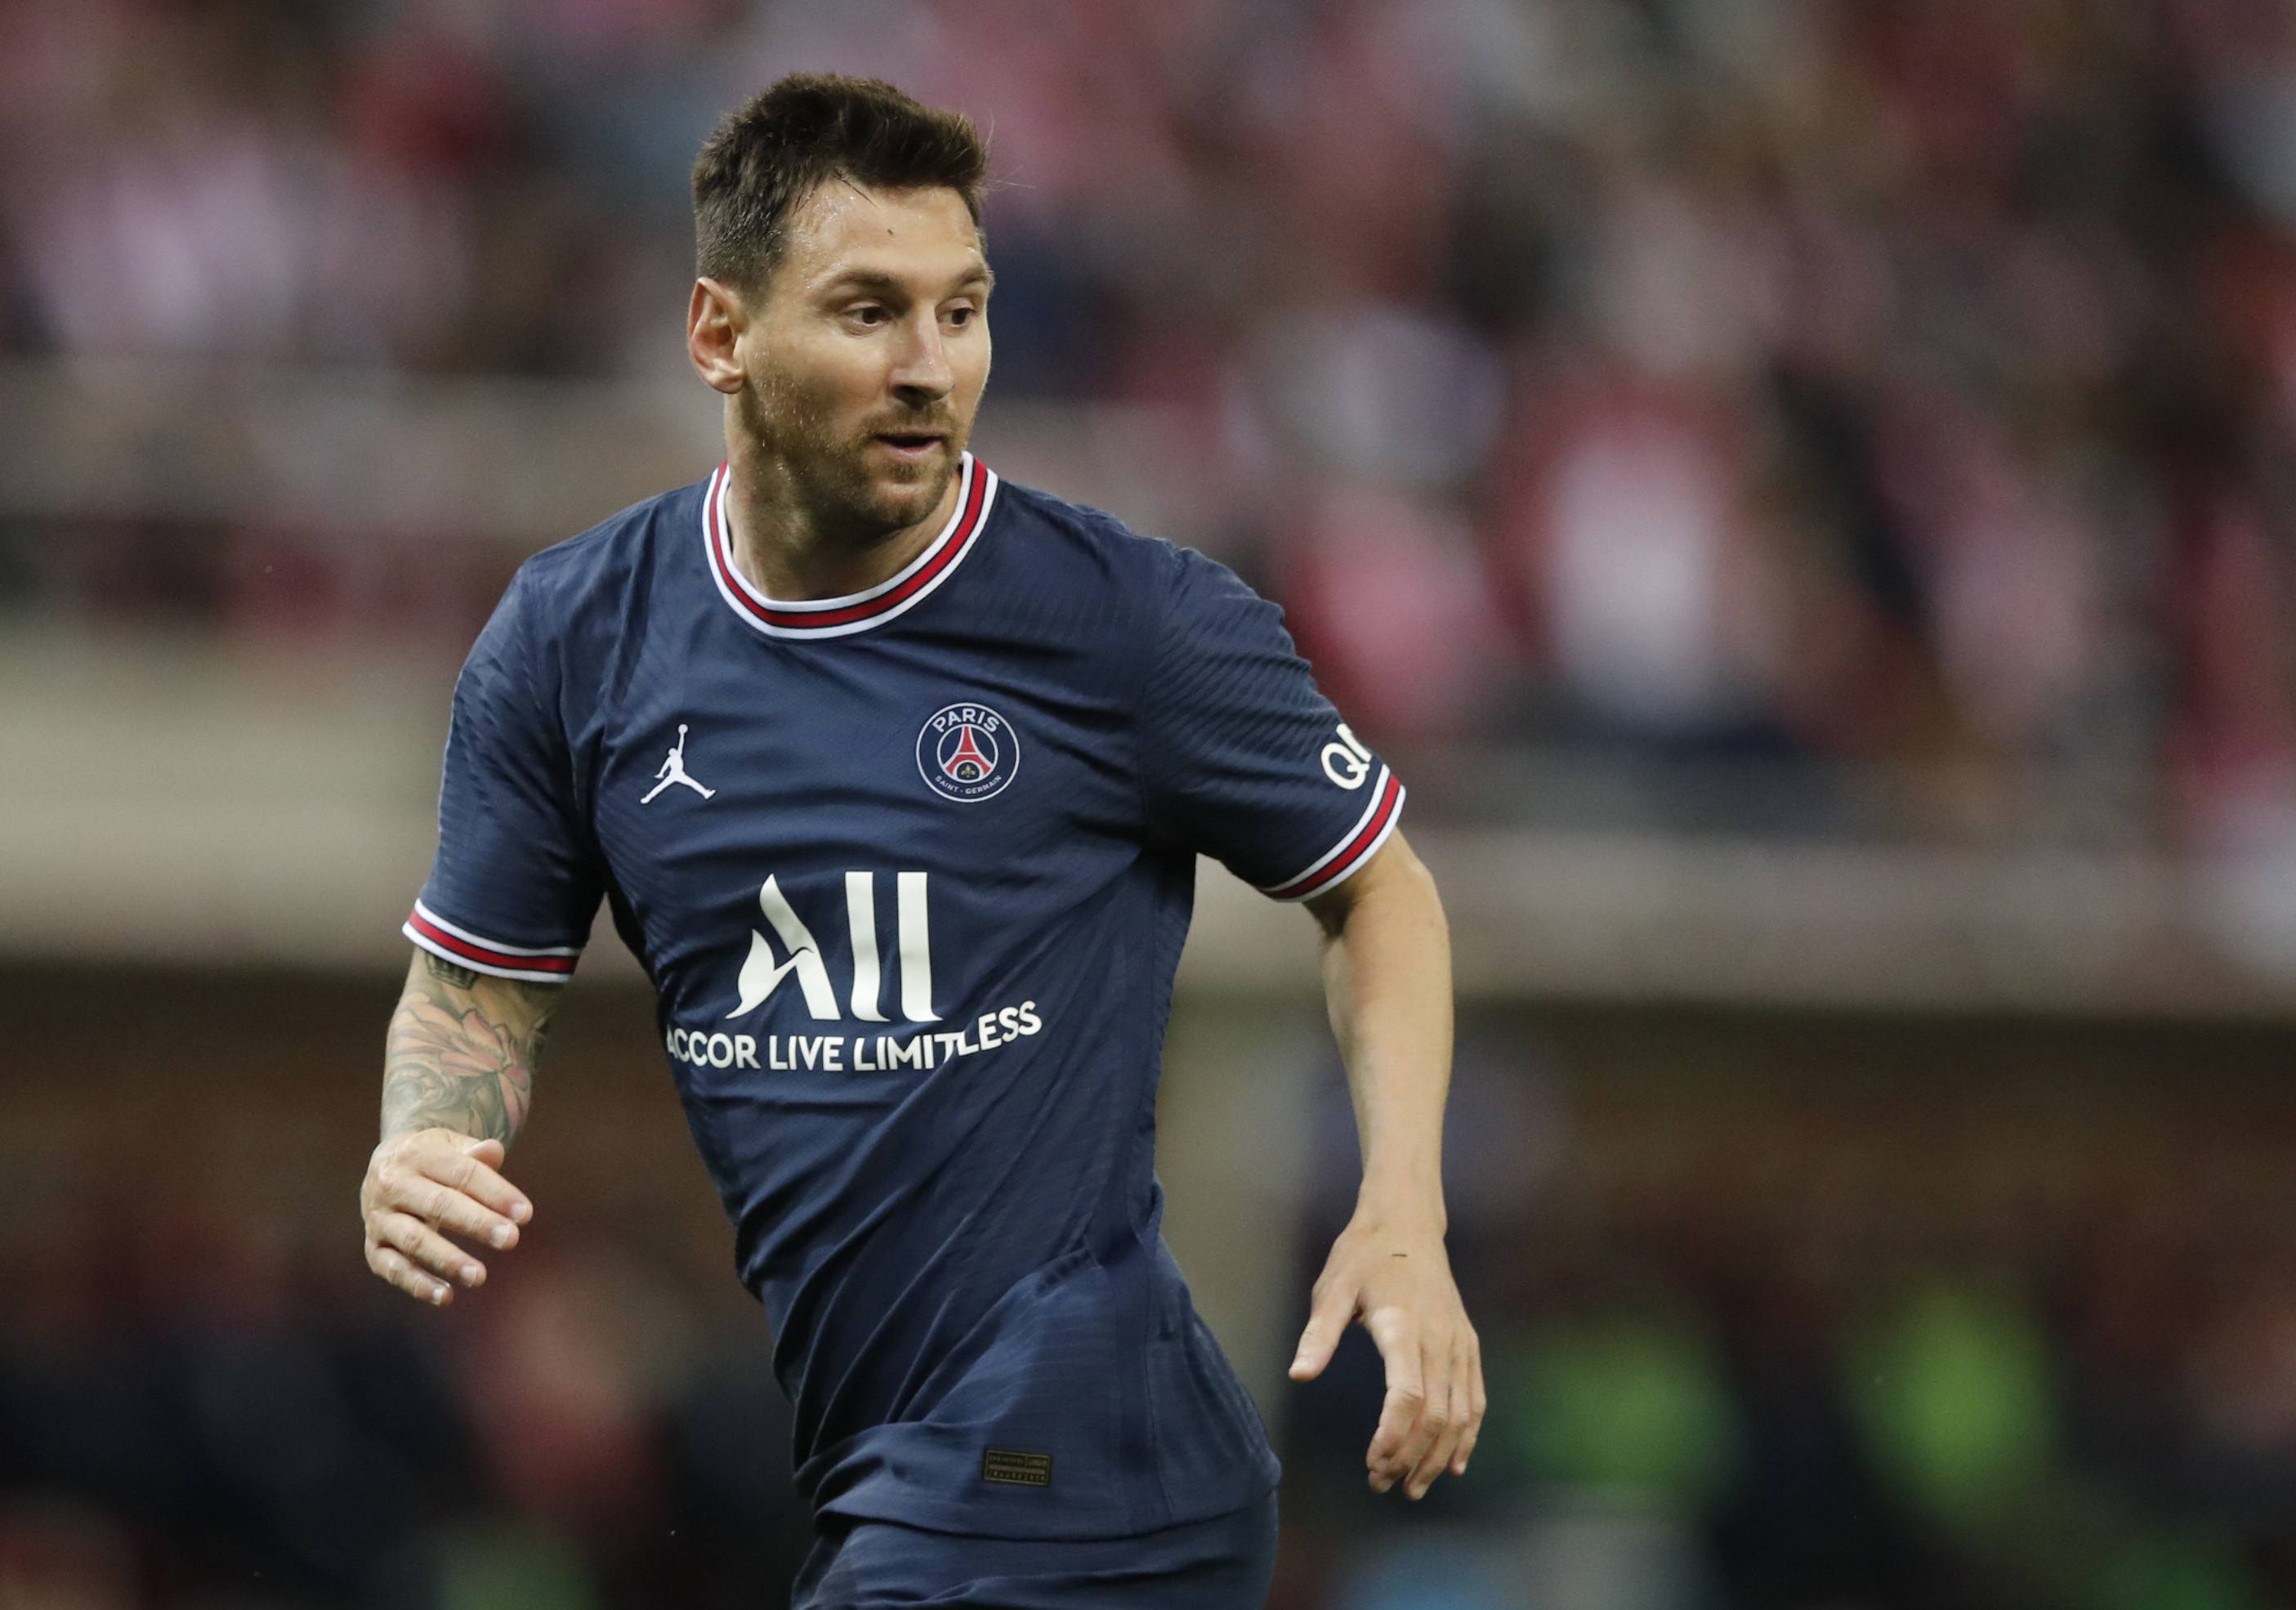 Lionel Messi makes Ligue 1 debut as Mbappe shines for PSG